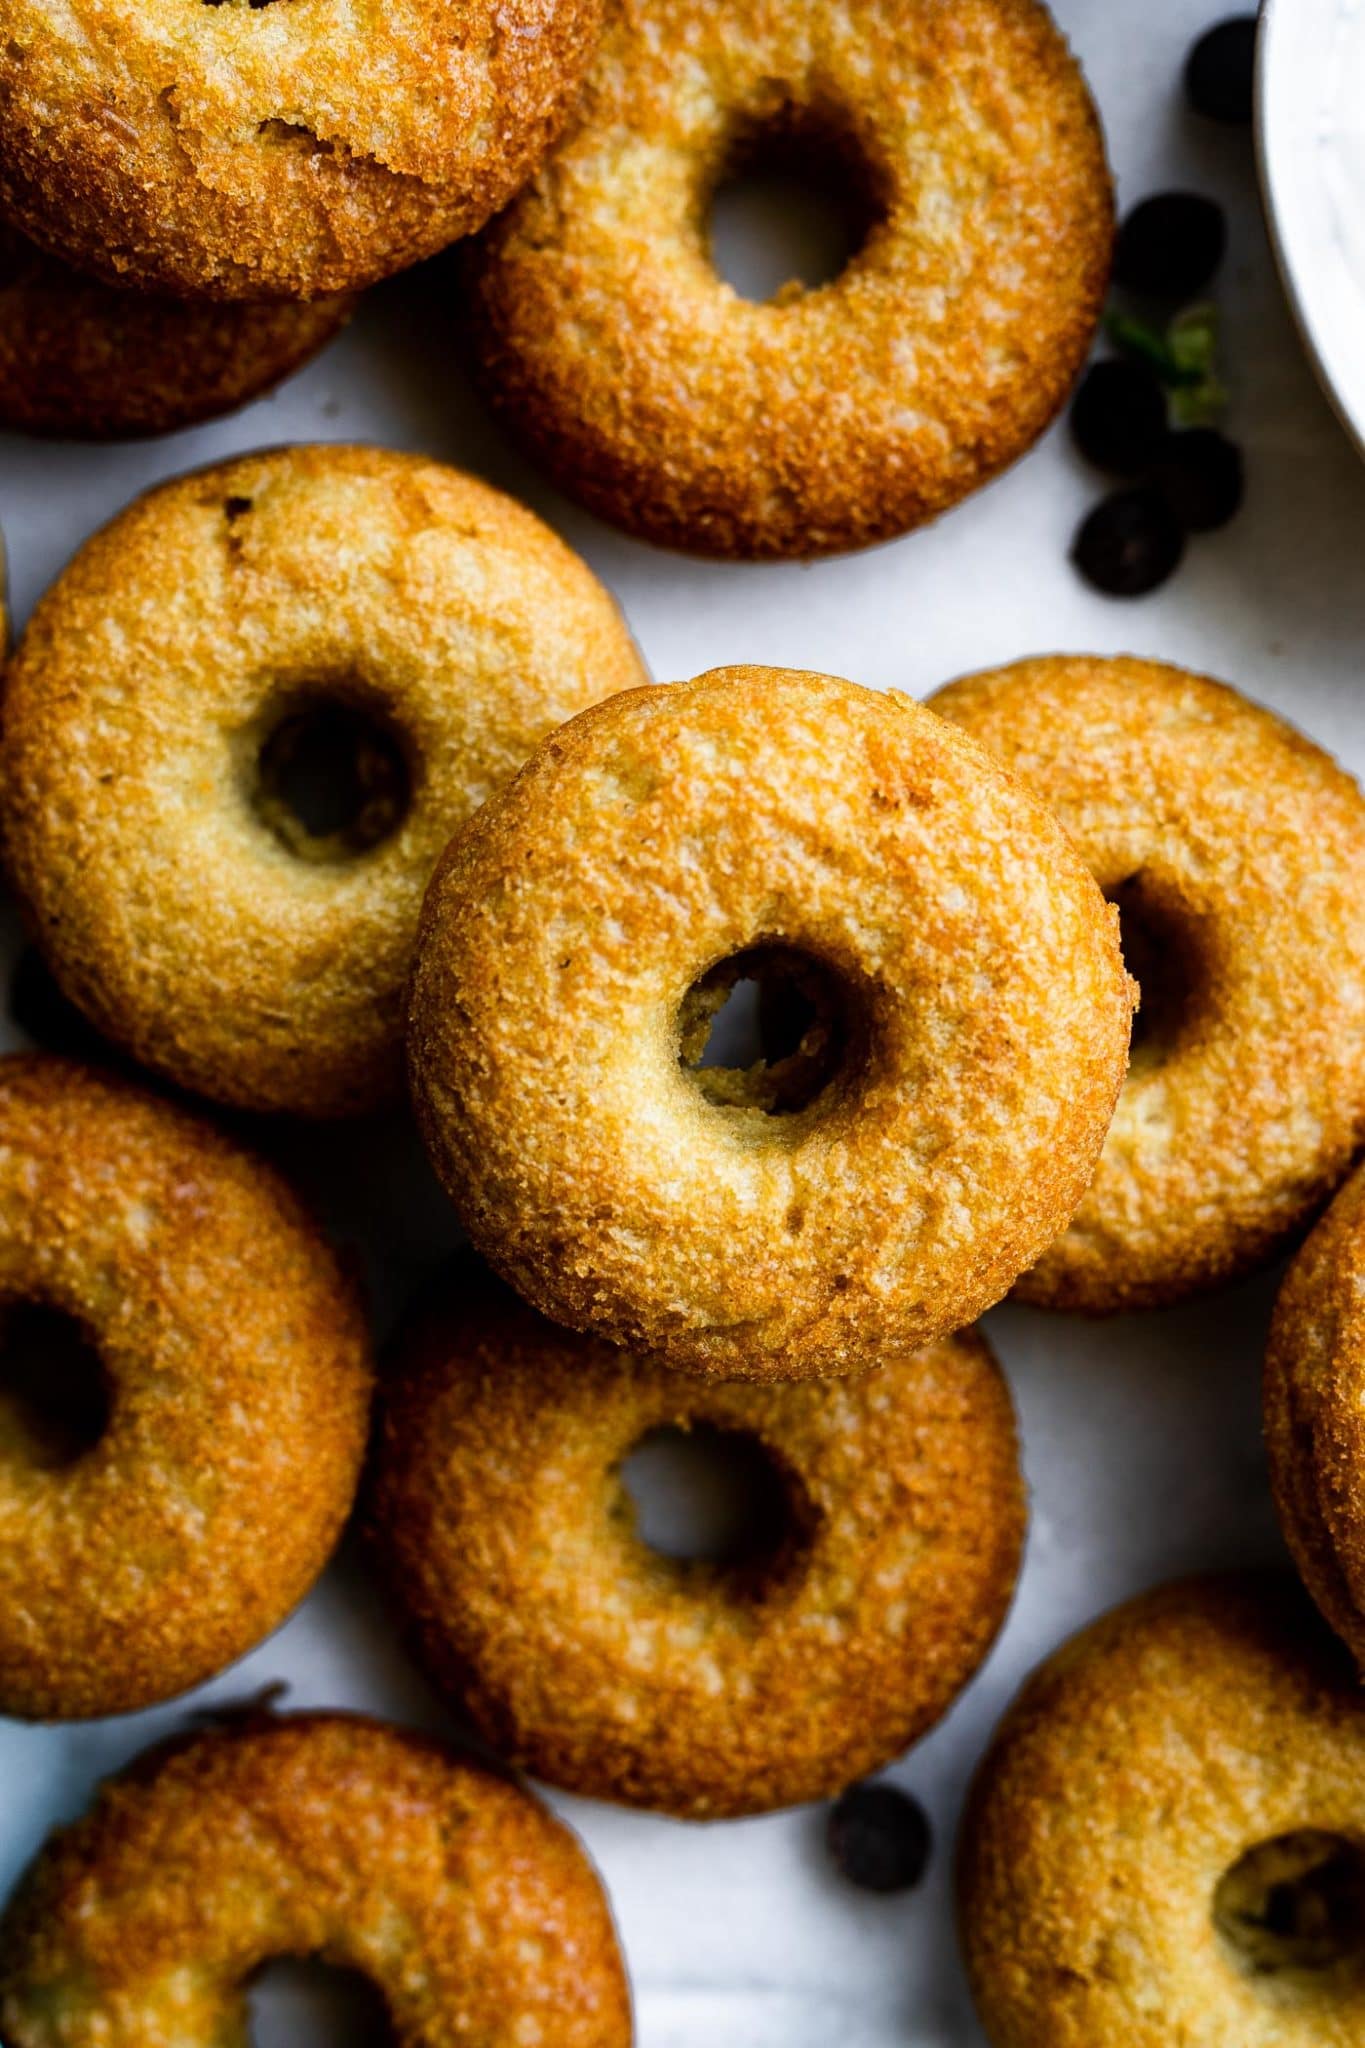 a pile of unglazed baked vegan donuts